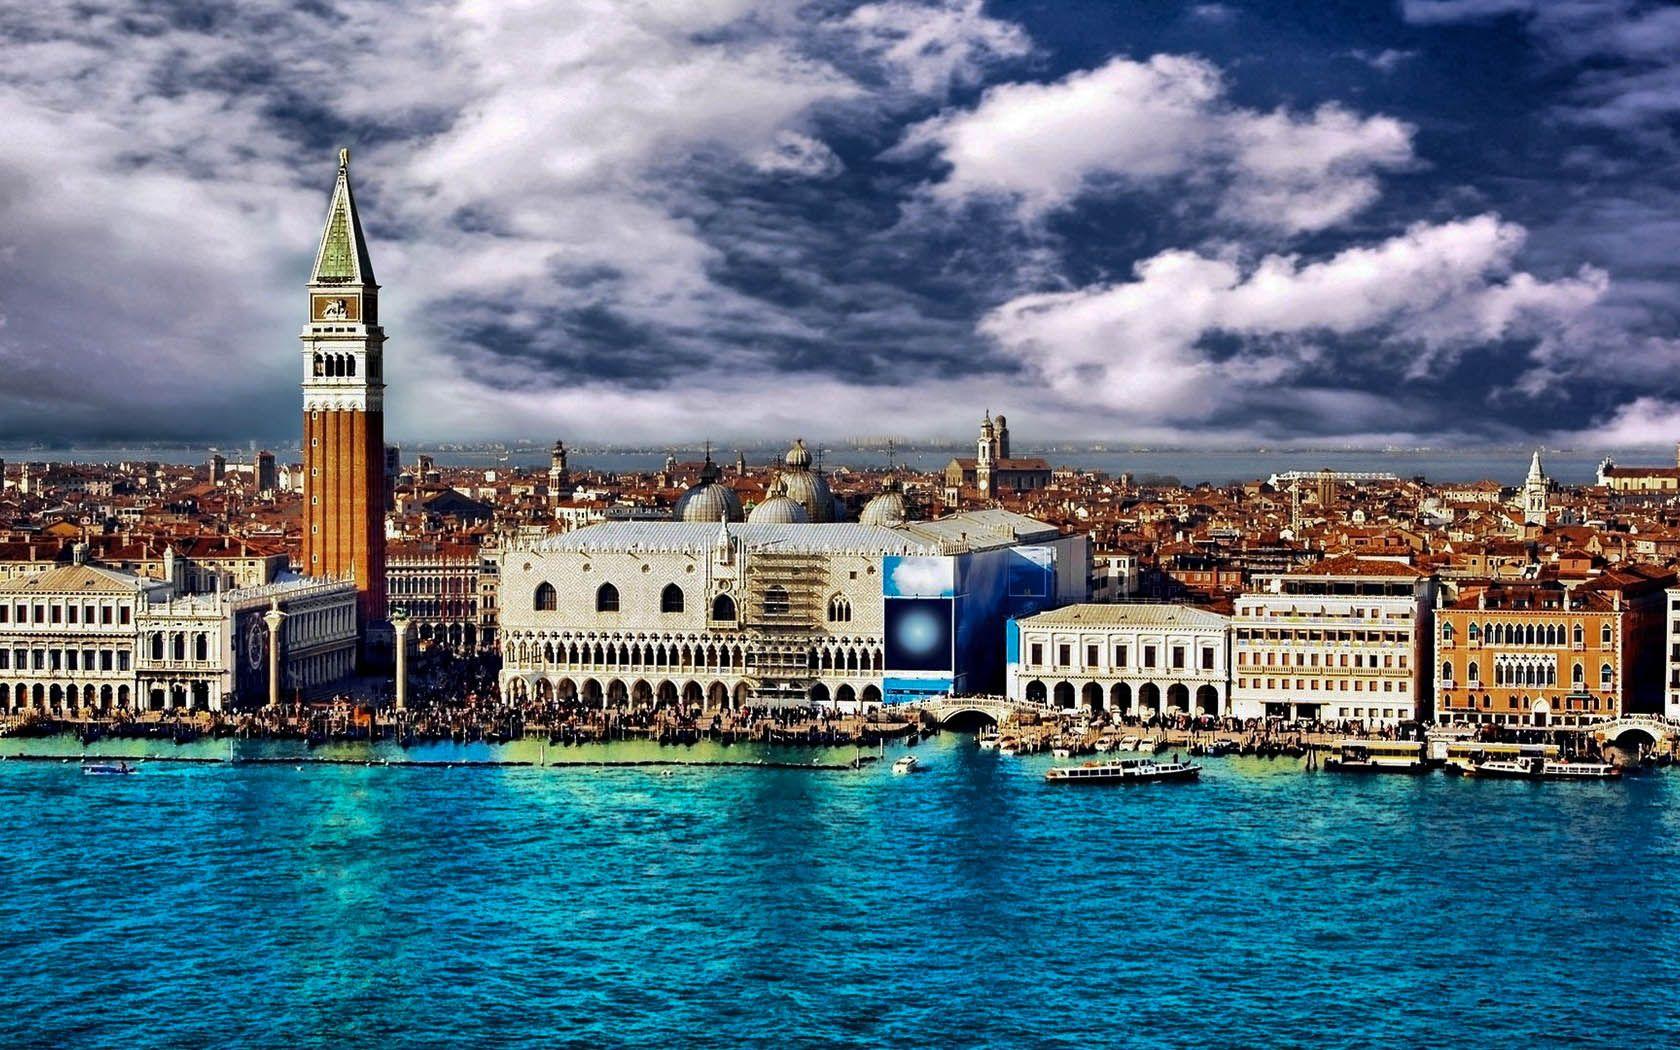 Venice New Awesome HD Wallpaper(High Quality). Venice